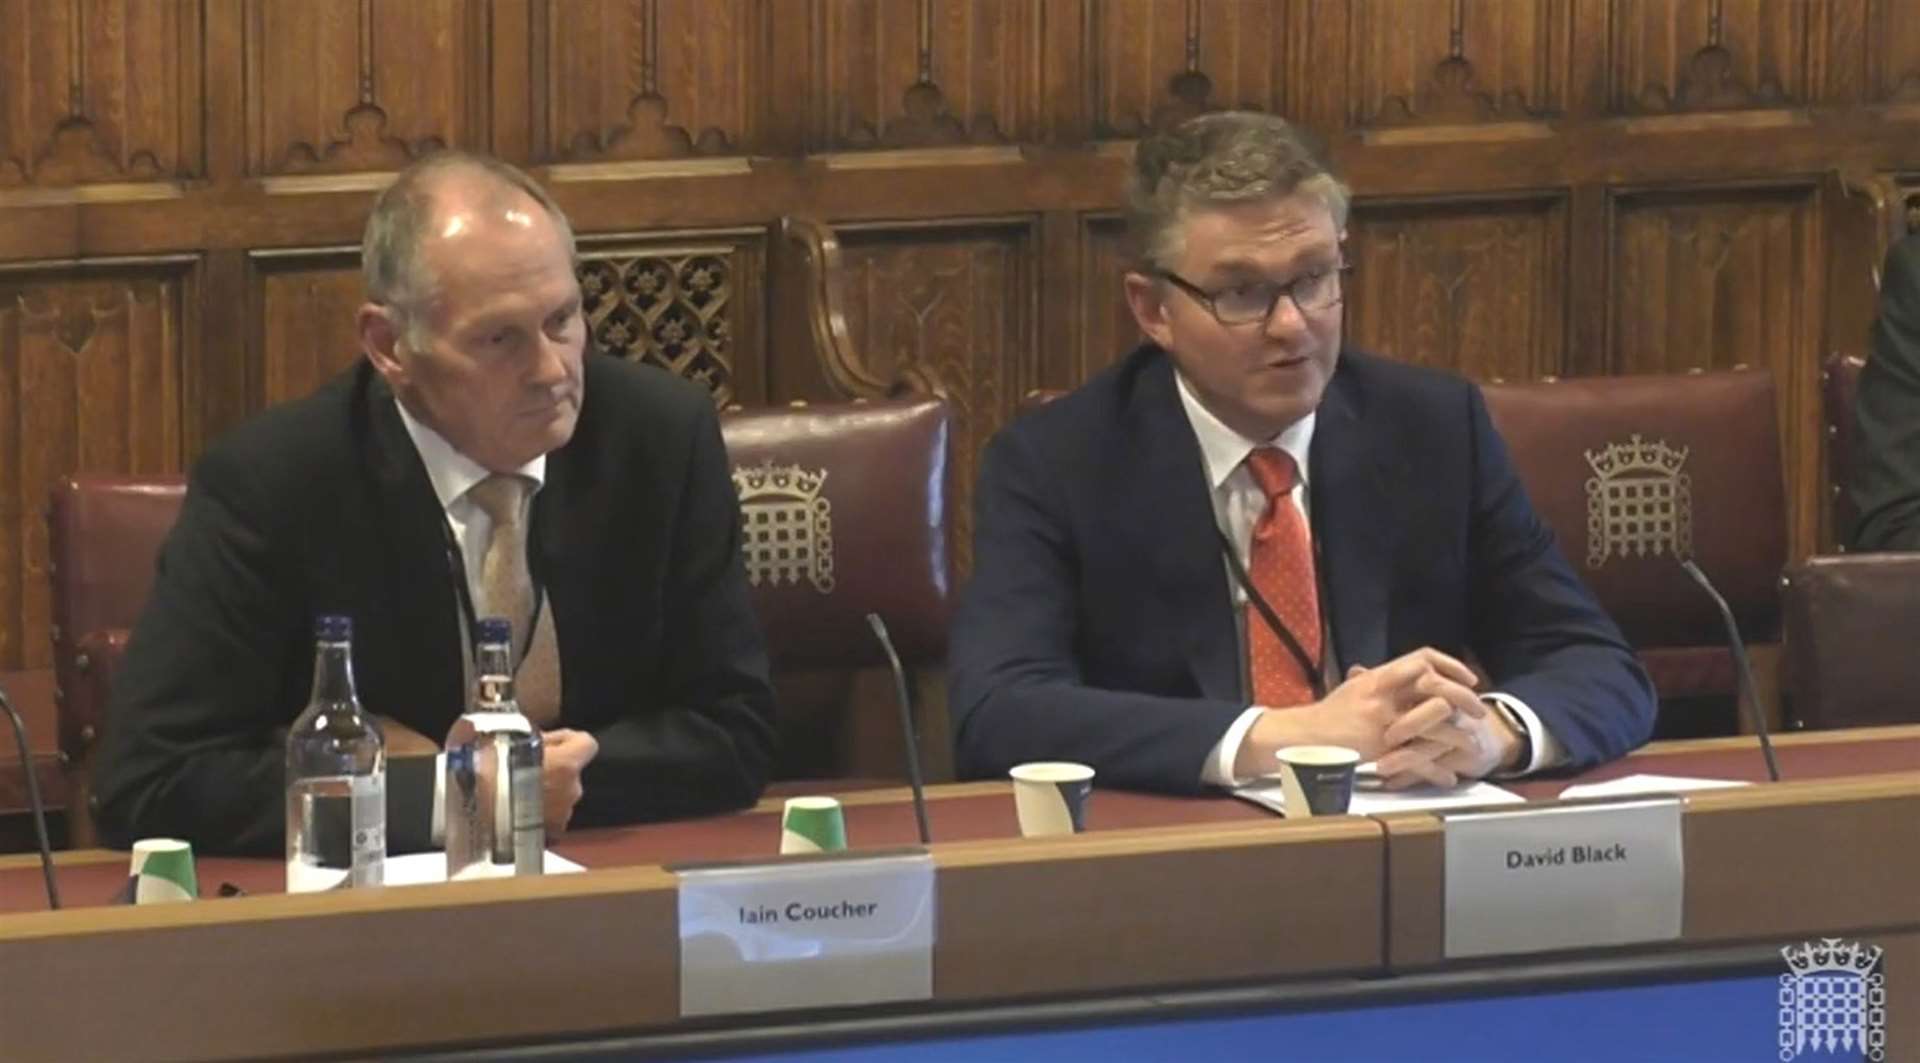 Ofwat chairman Iain Coucher and chief executive David Black giving evidence to the Industry and Regulators Committee (House of Commons/PA)